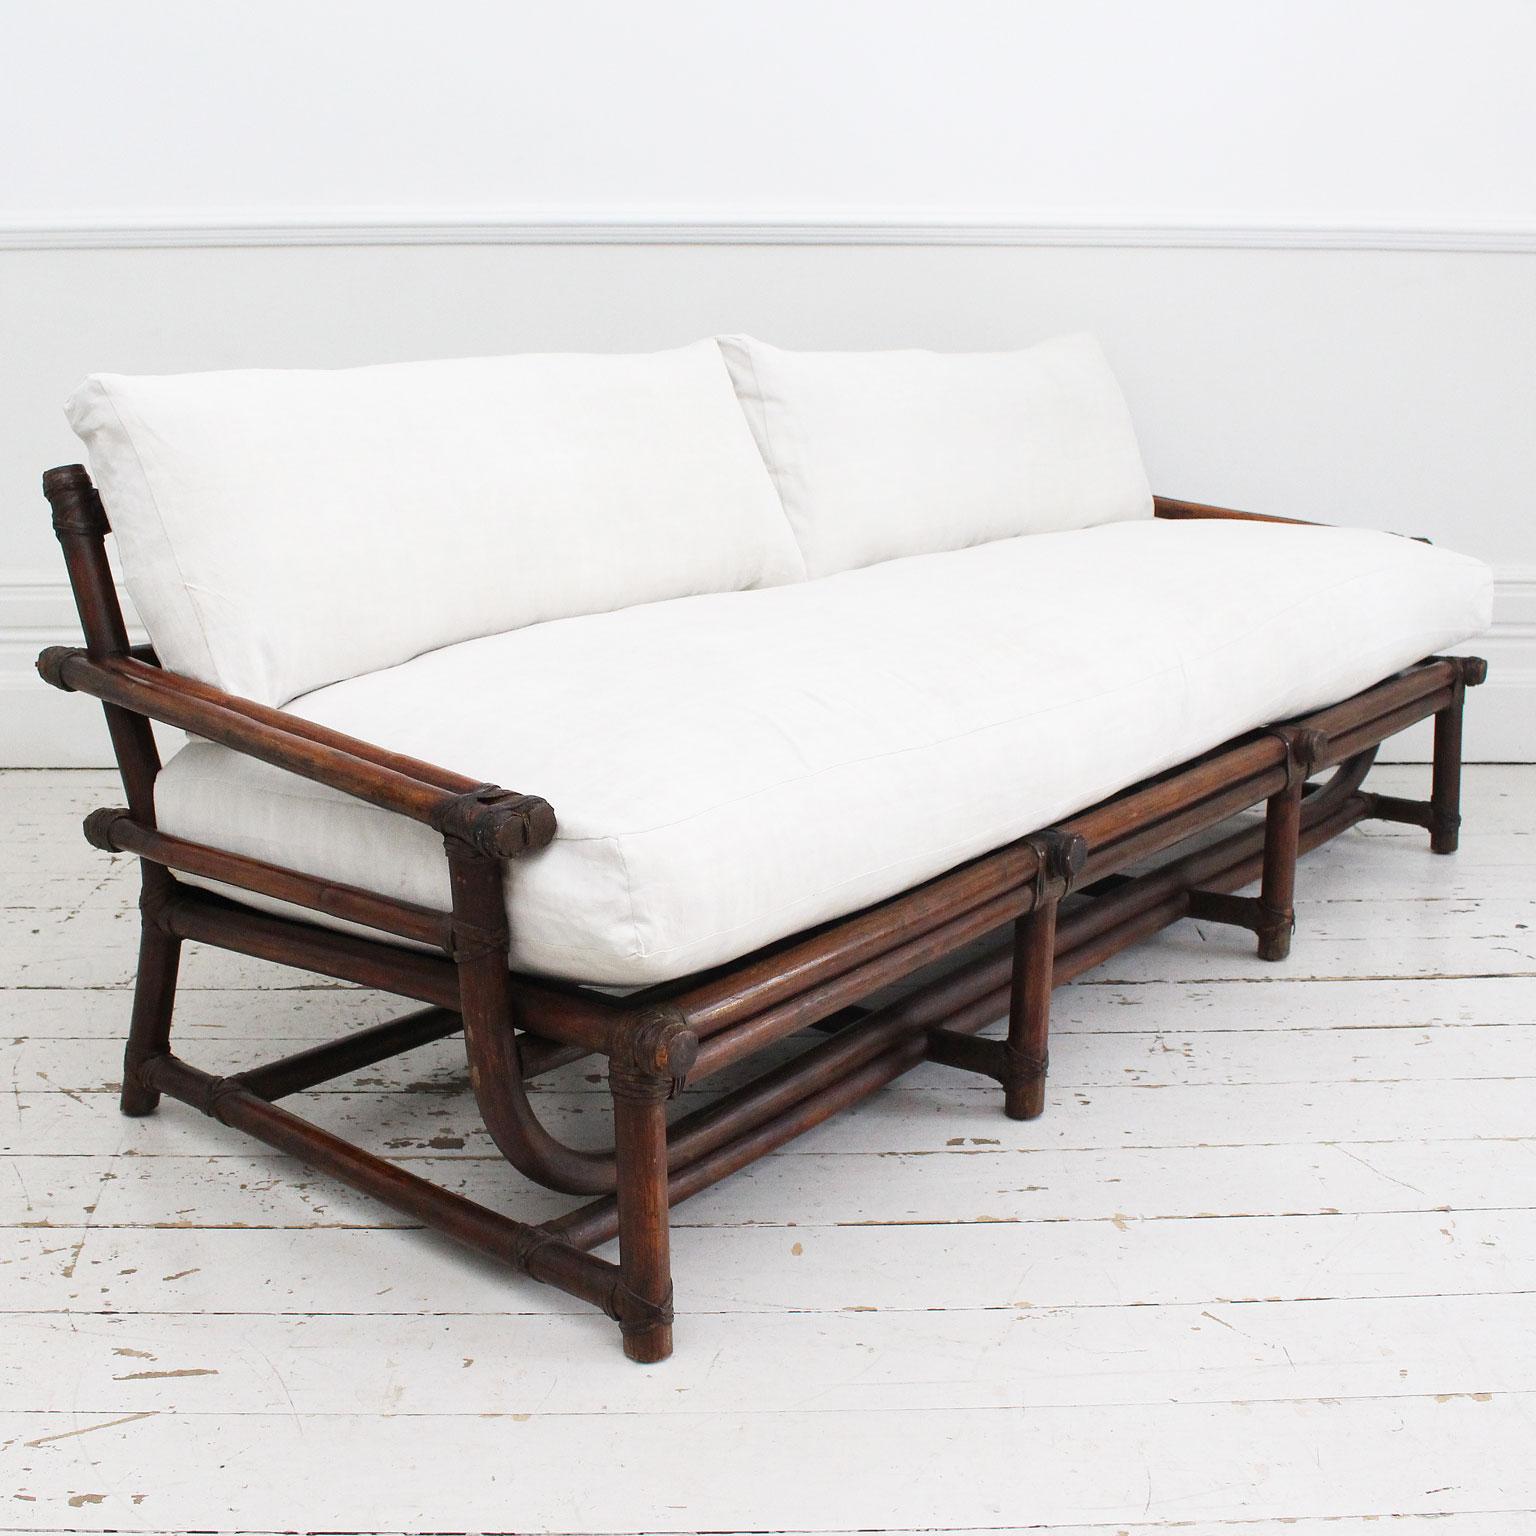 This mid century French dark bamboo sofa is wonderfully comfortable and chic. It can be used inside covered with soft hides or outside. We love the elegant curves and the leather wrap detail. Charlotte has made luxurious, feather filled antique